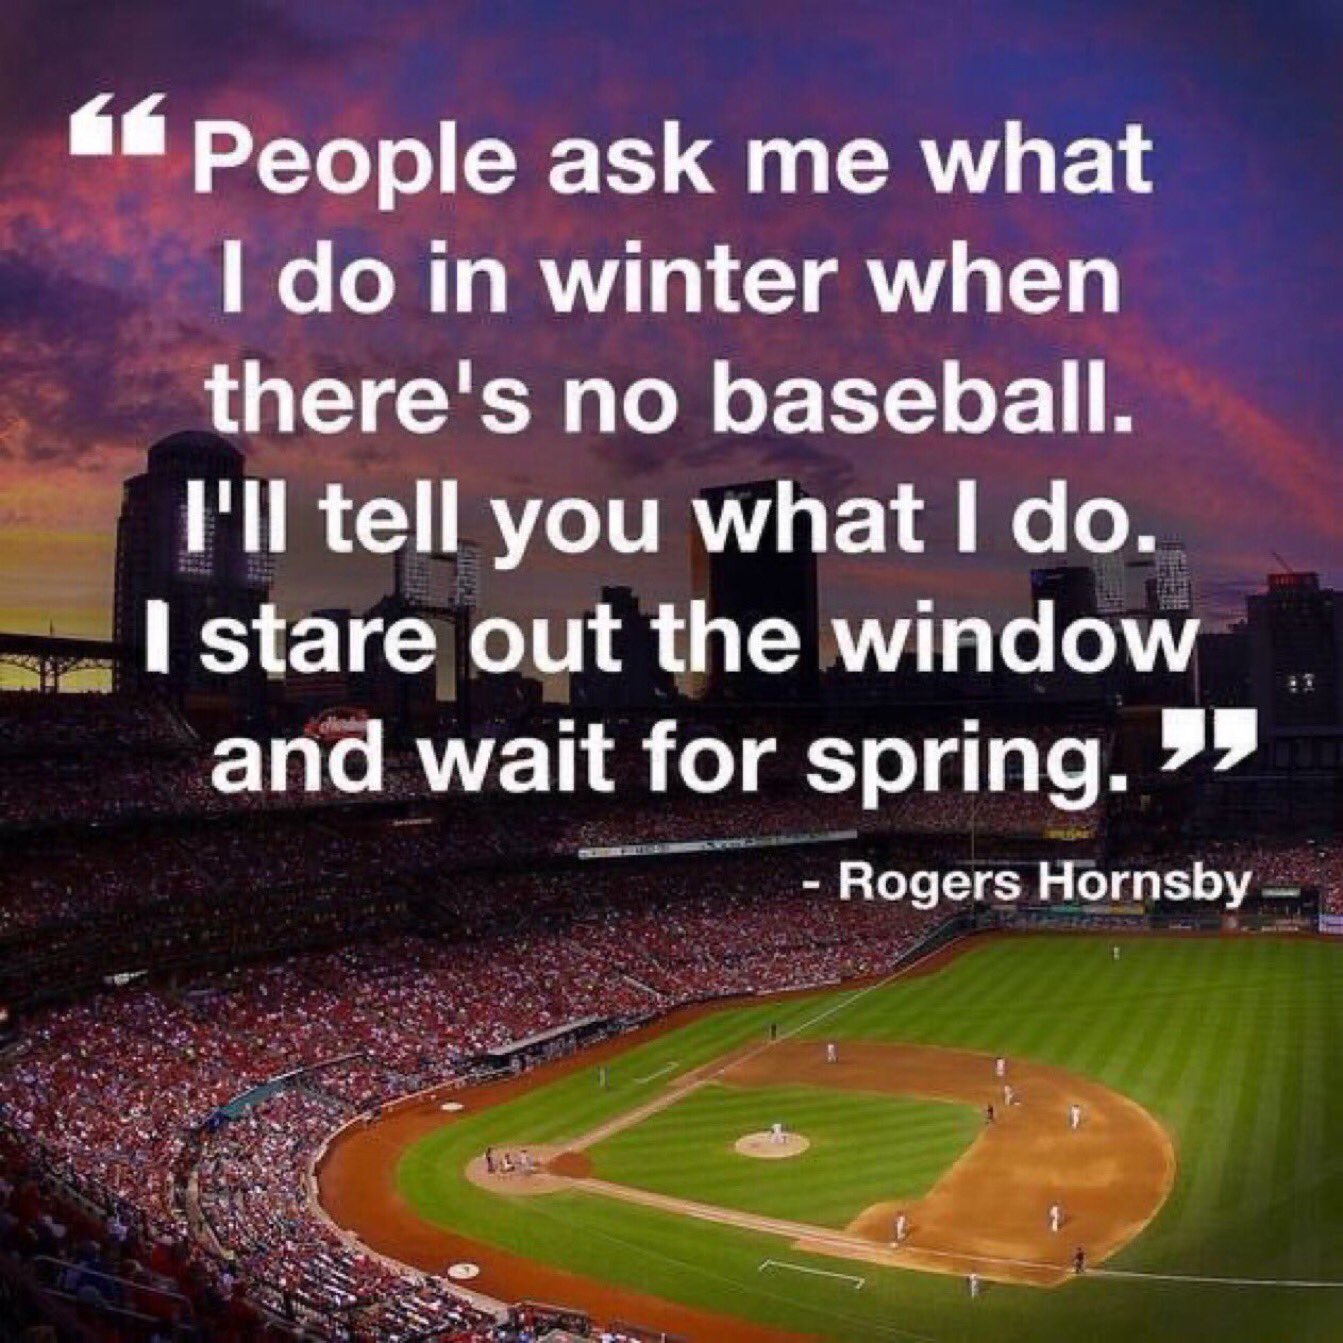 Tom's Old Days on Twitter: "The Baseball Season is will be the Sentiment of Many,for the next few Months. #MLB #USA #offseason #OpeningDay https://t.co/hgA1rbOT9Z" / Twitter